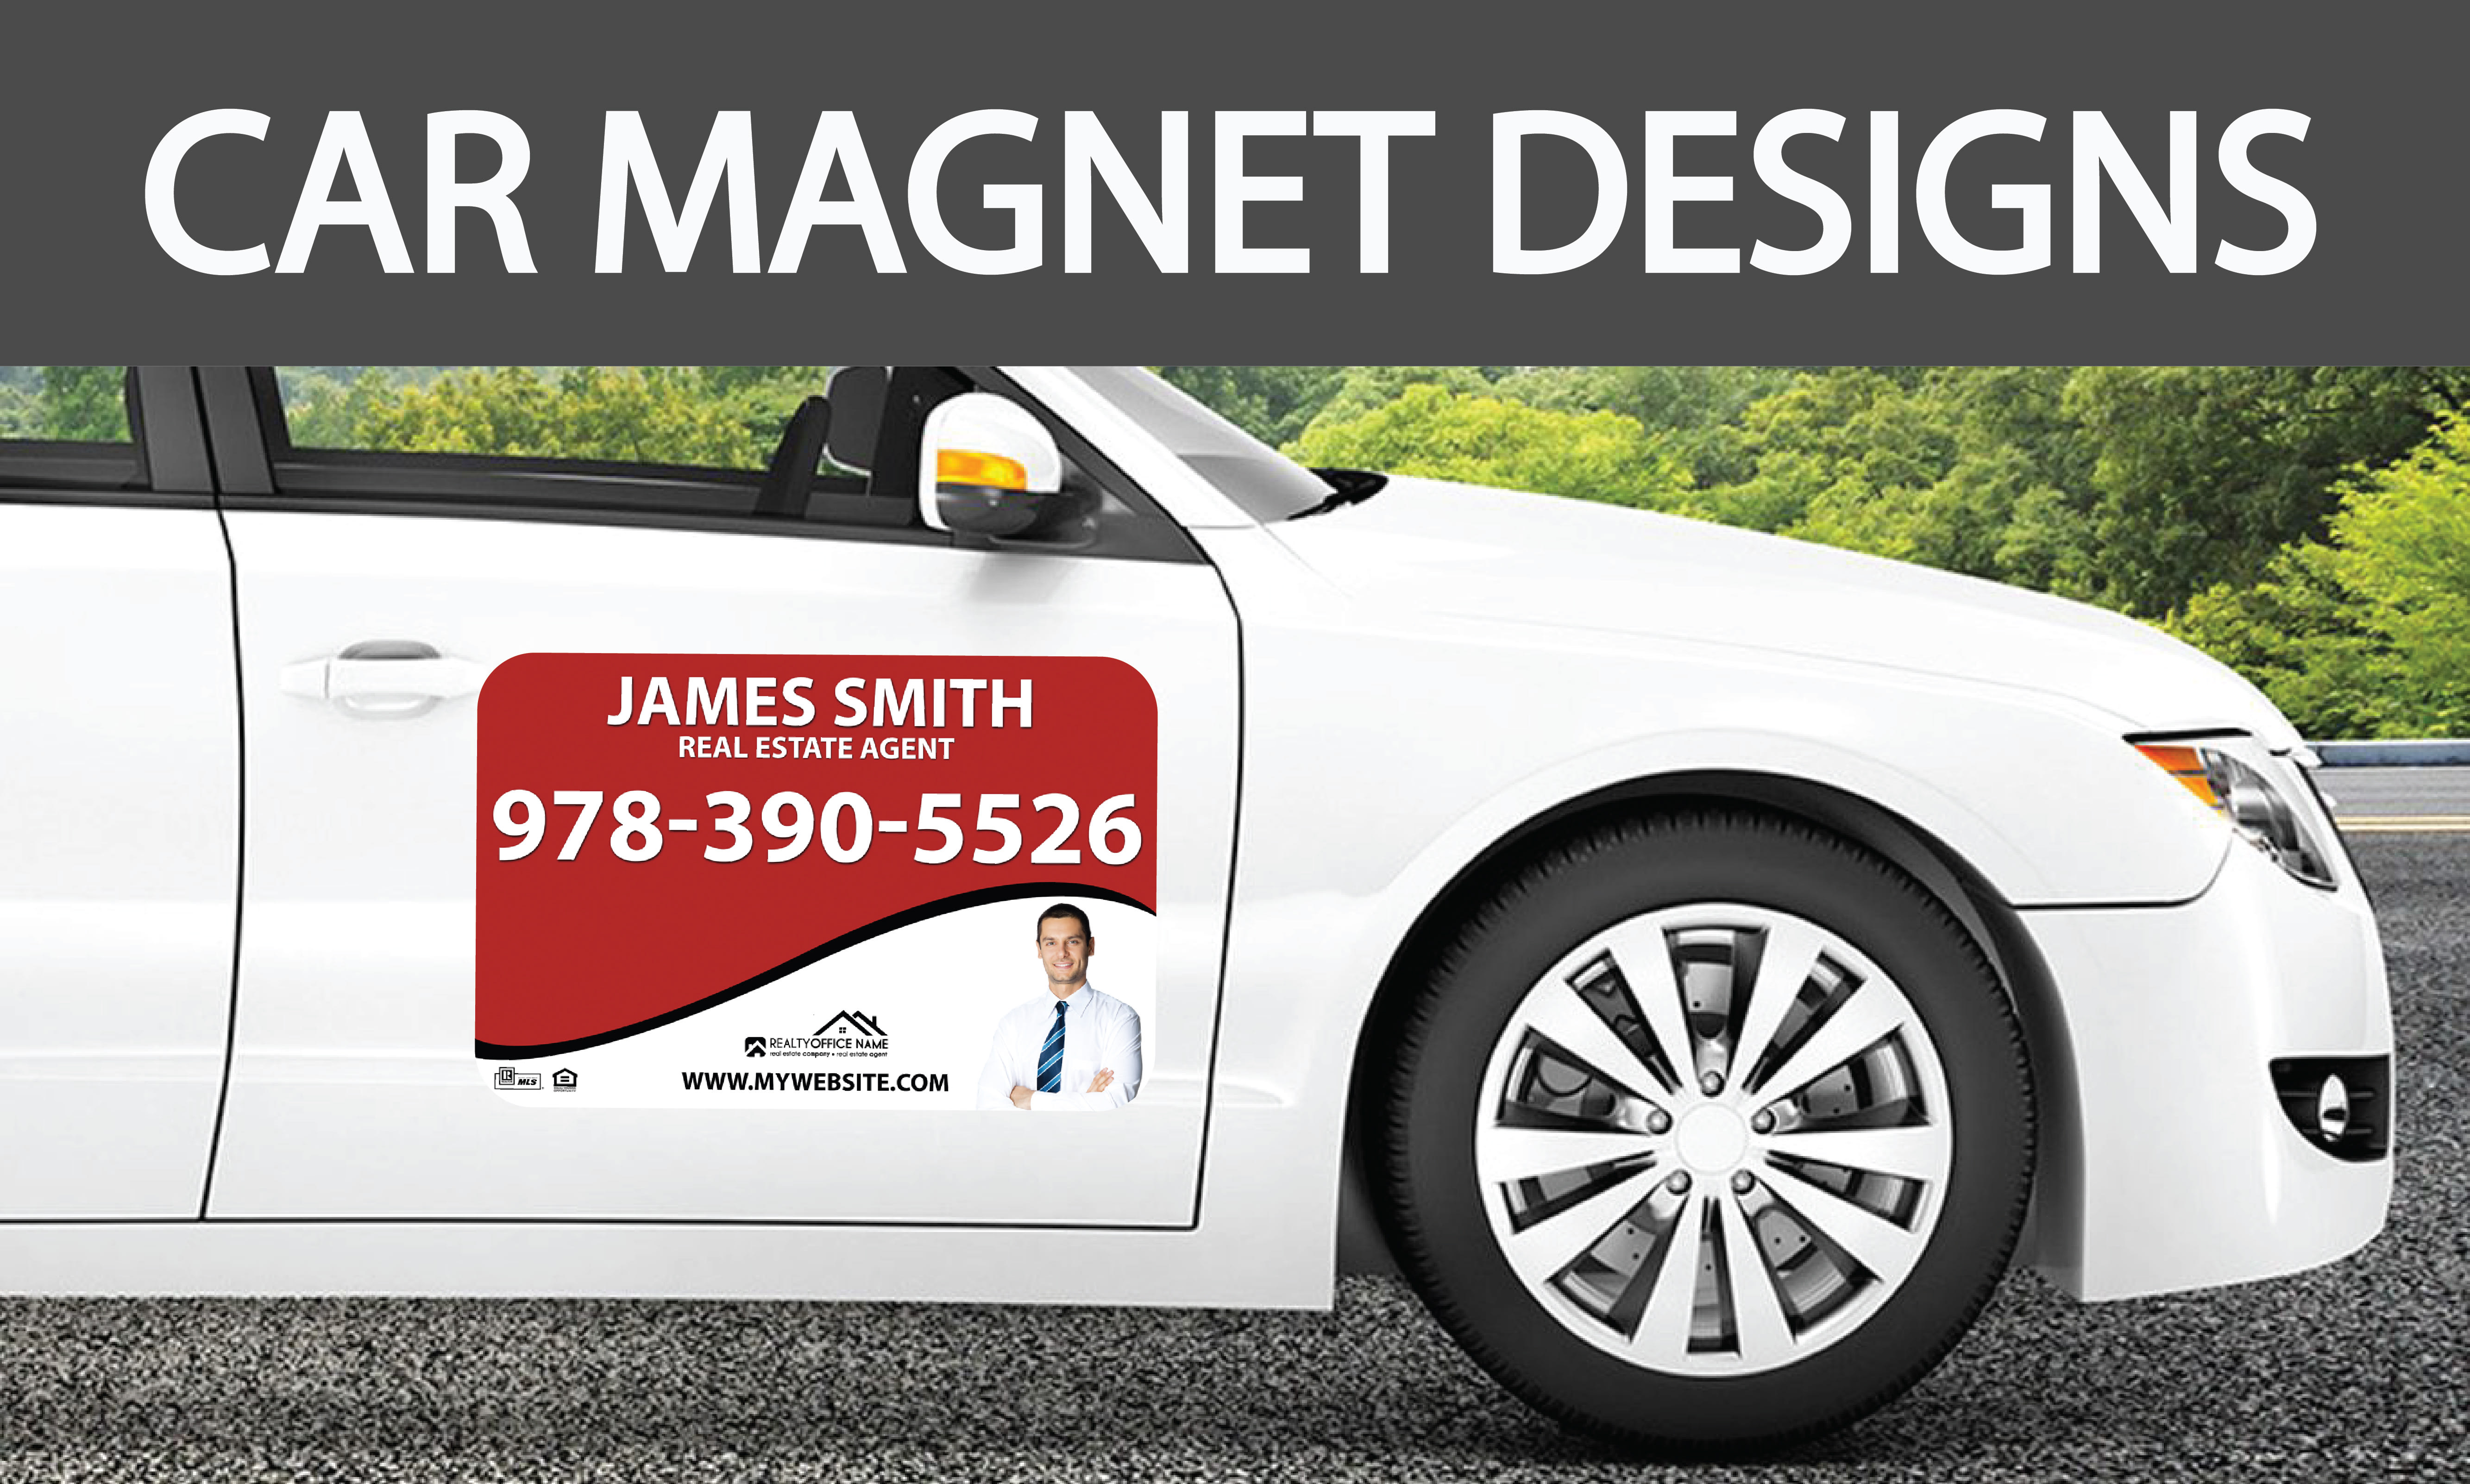 Car Magnets, Vehicle Magnets, Vehicle Branding